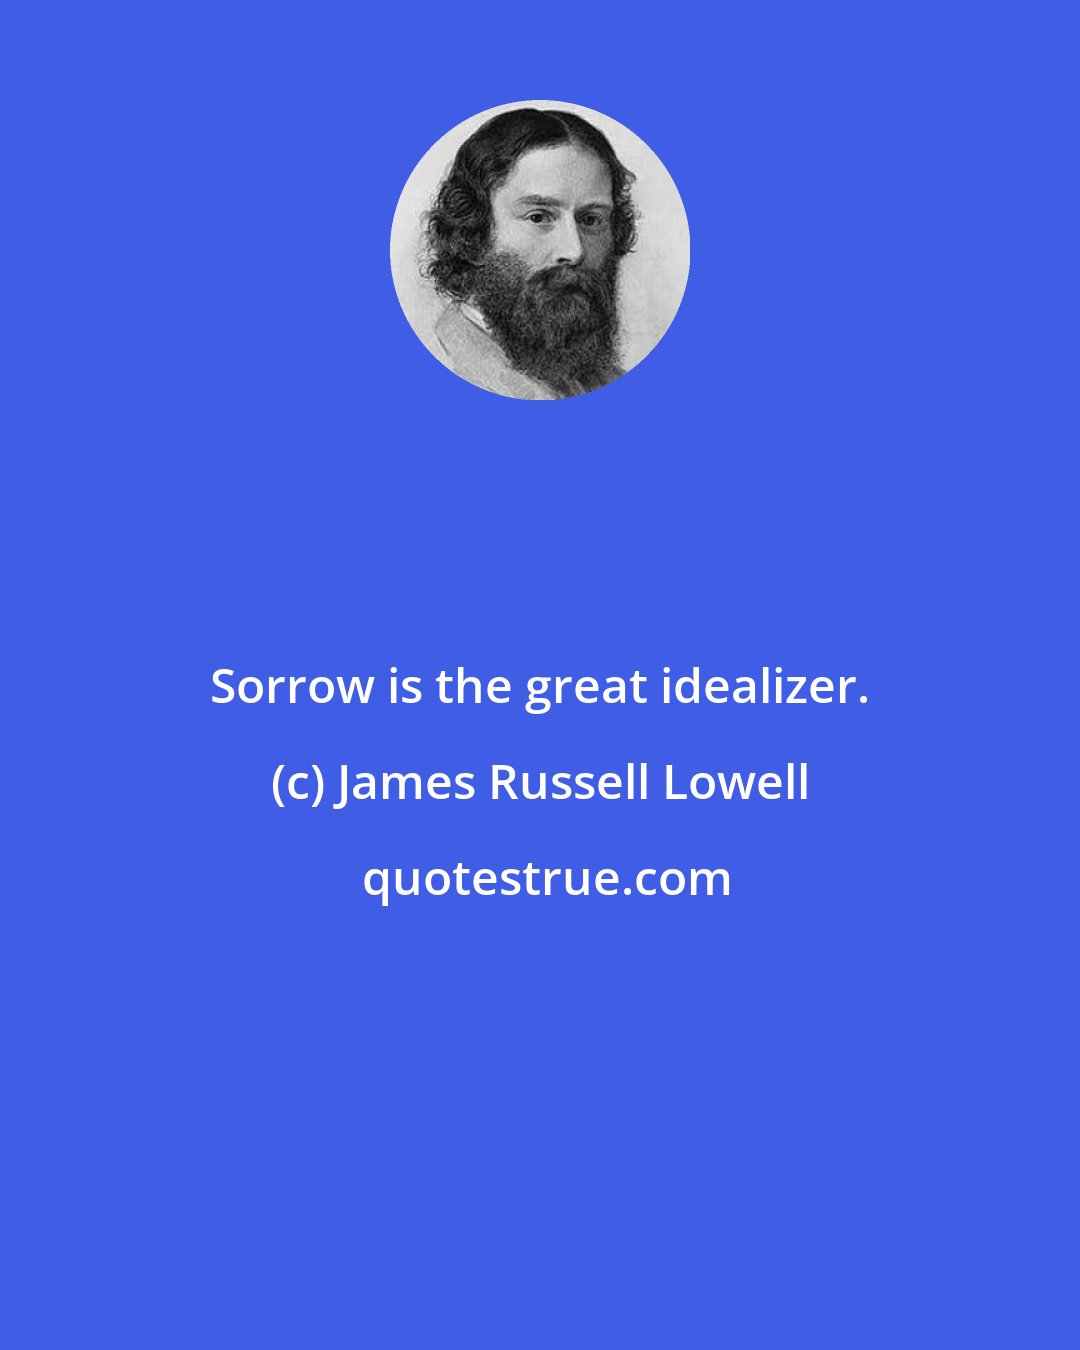 James Russell Lowell: Sorrow is the great idealizer.